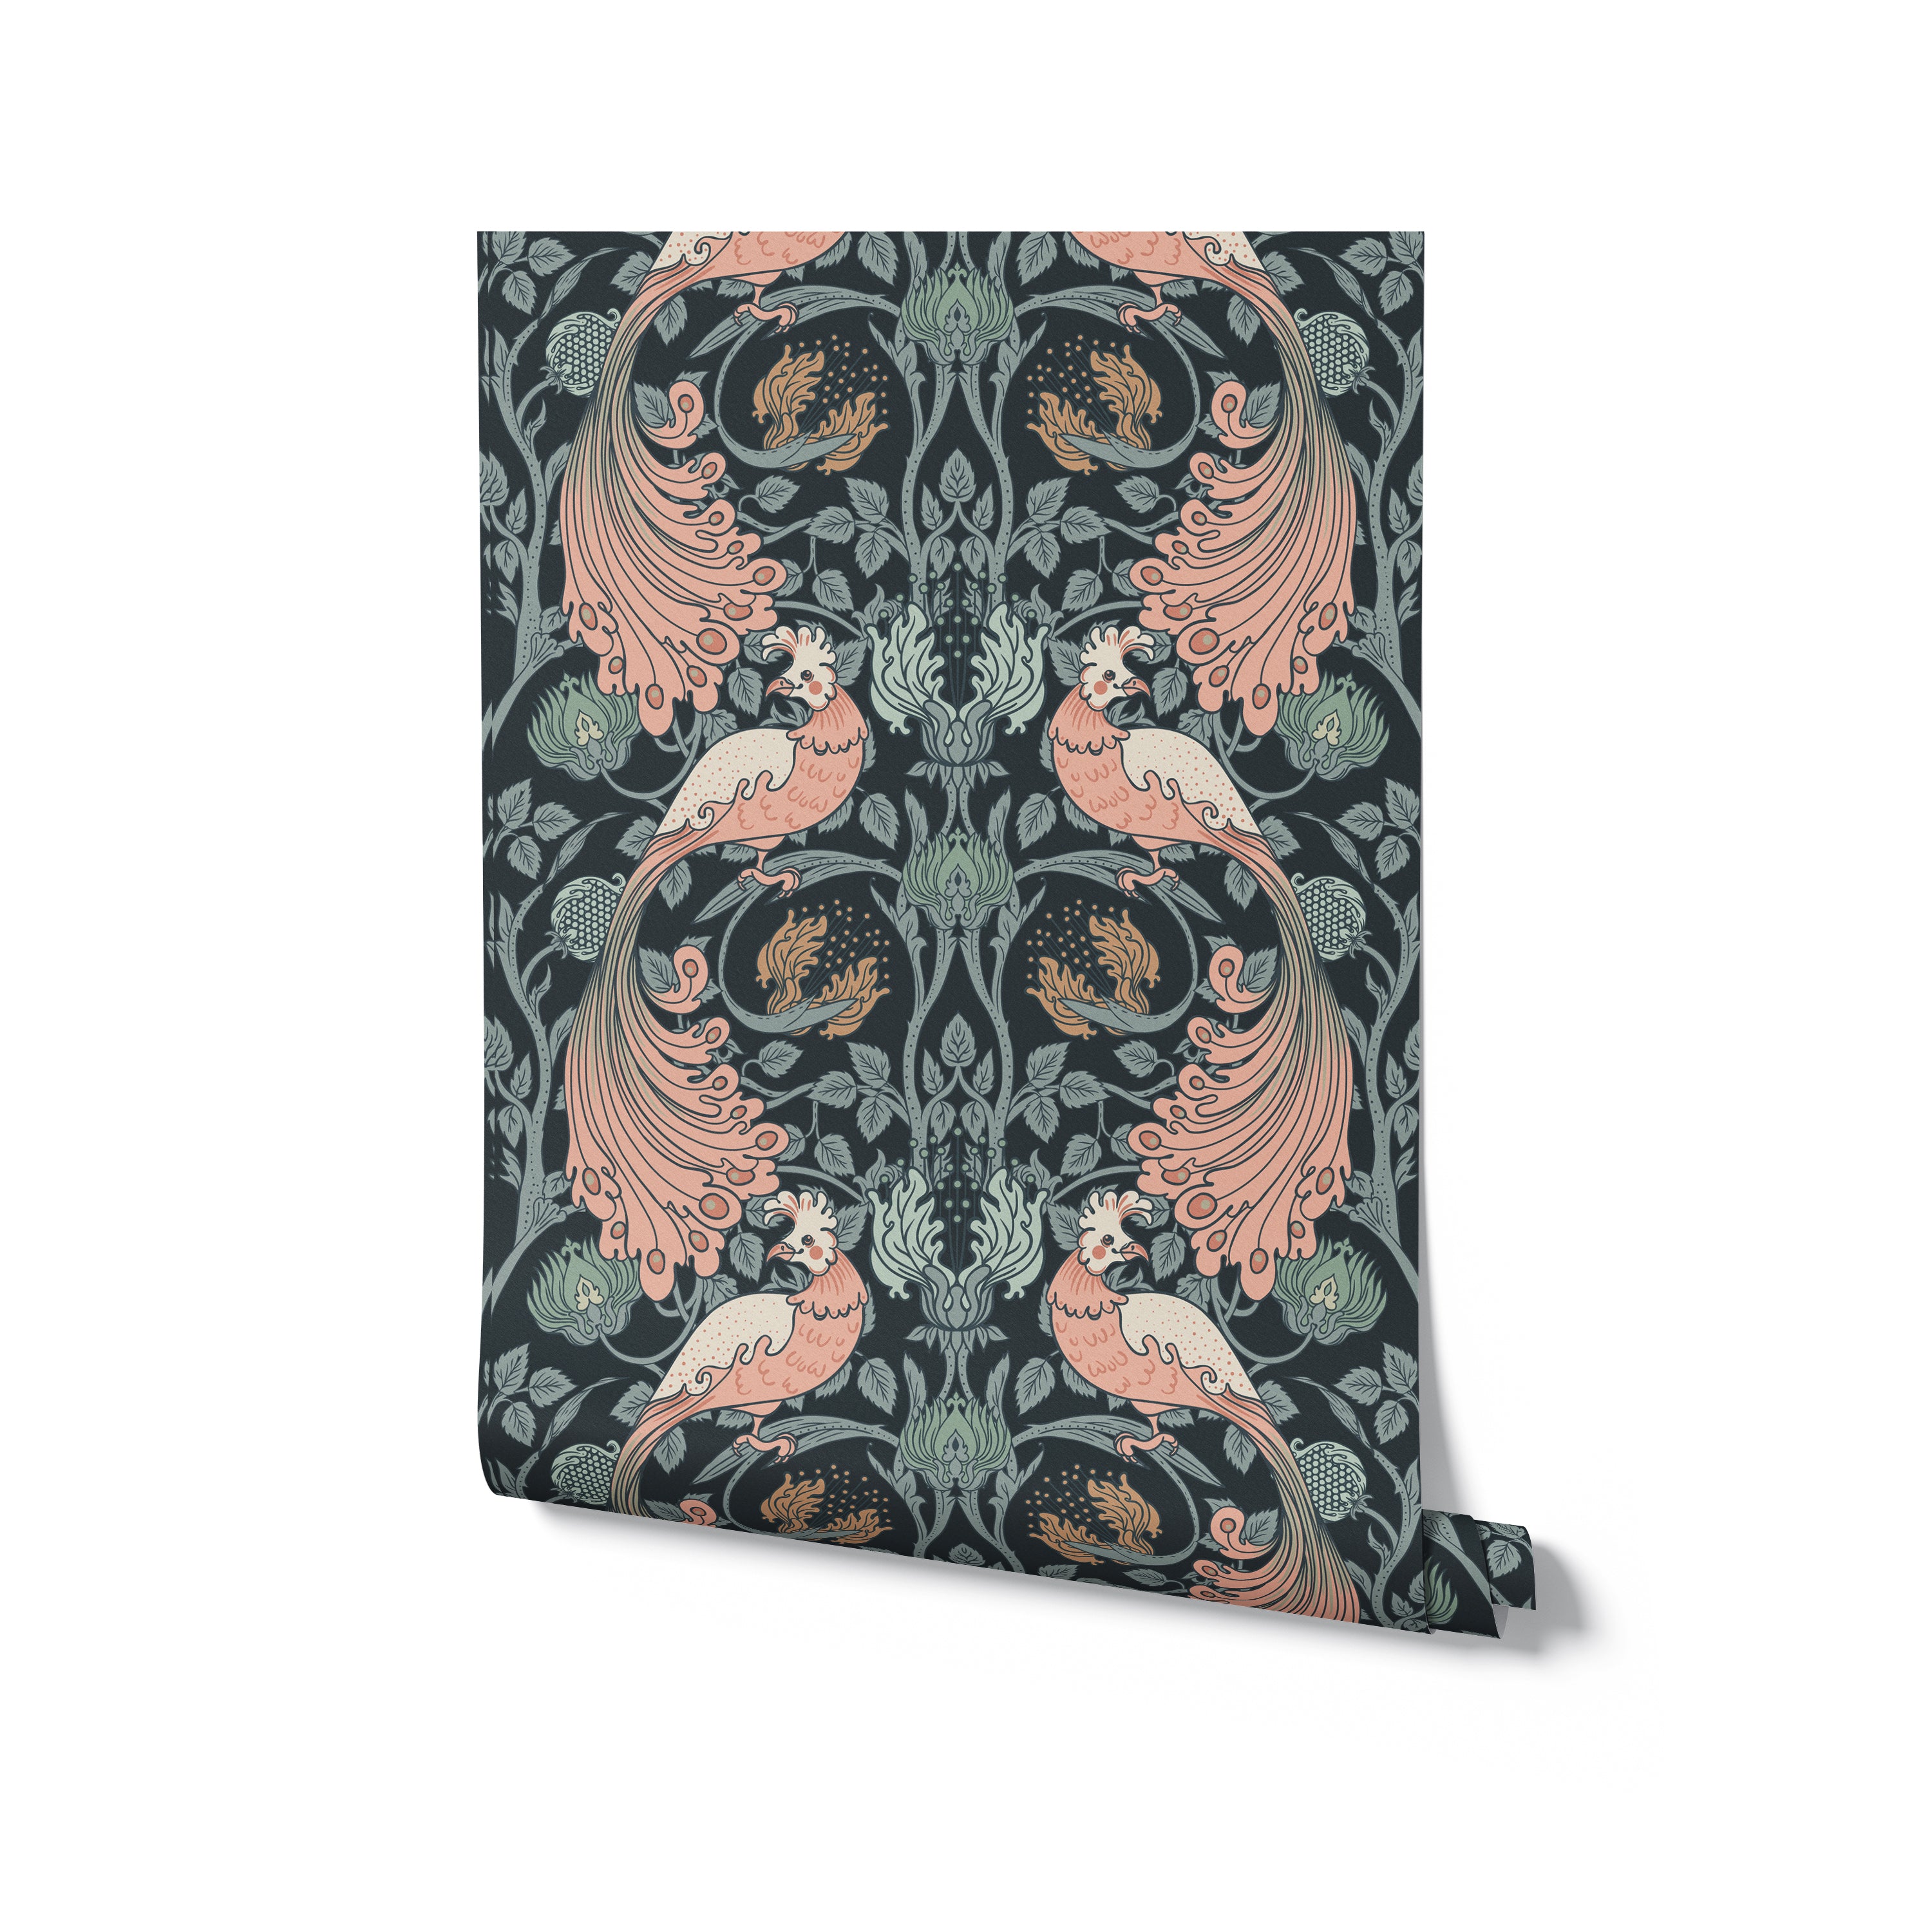 Mockup of the Peacock Damask Wallpaper roll, displaying the full ornate design featuring stylized peacocks and intricate floral motifs in a sophisticated color palette of dark green, pink, and beige